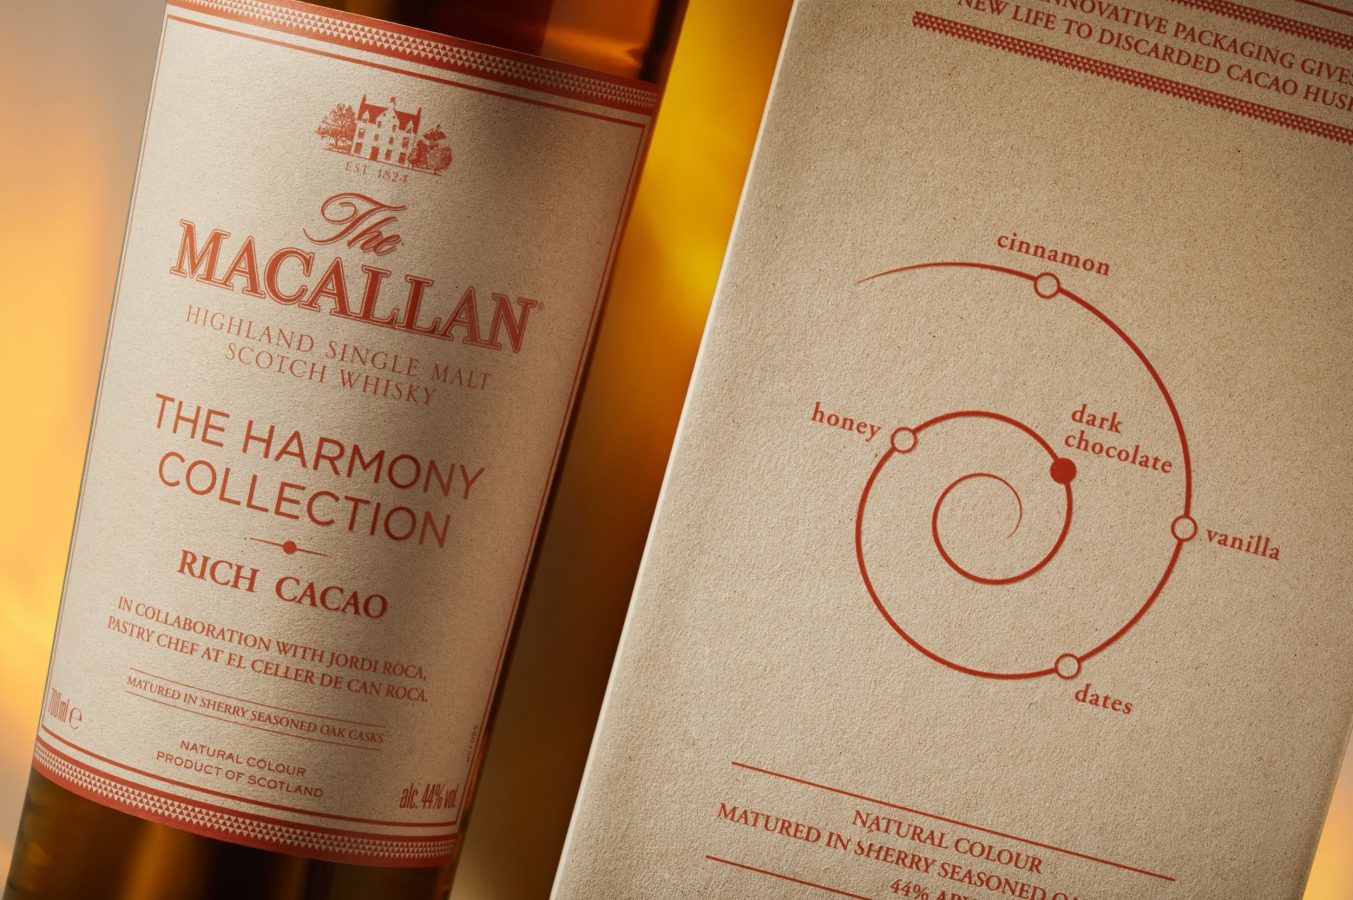 Quick-Take: The Macallan Harmony Collection Rich Cacao